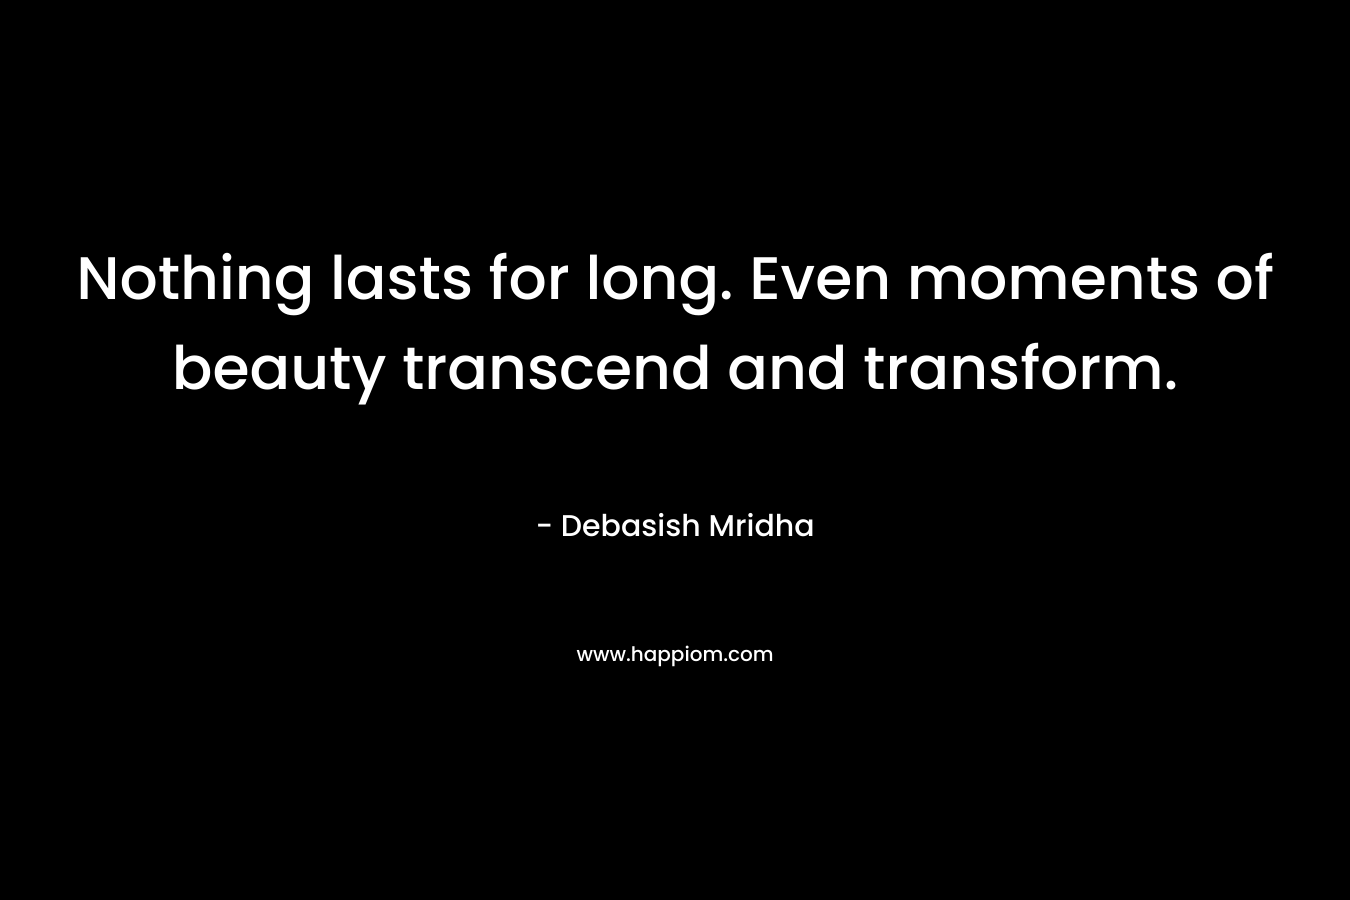 Nothing lasts for long. Even moments of beauty transcend and transform. – Debasish Mridha